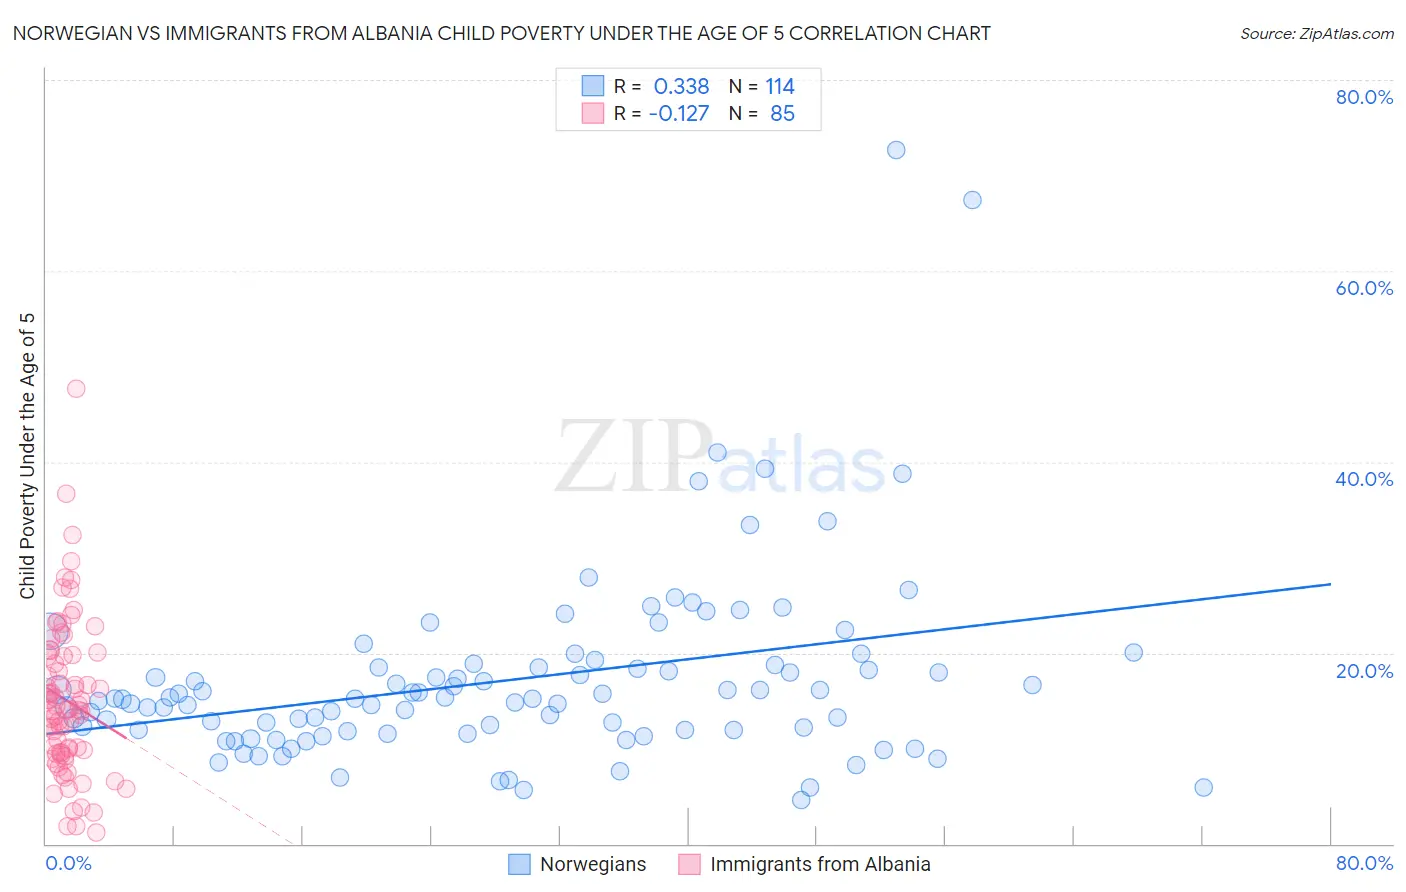 Norwegian vs Immigrants from Albania Child Poverty Under the Age of 5